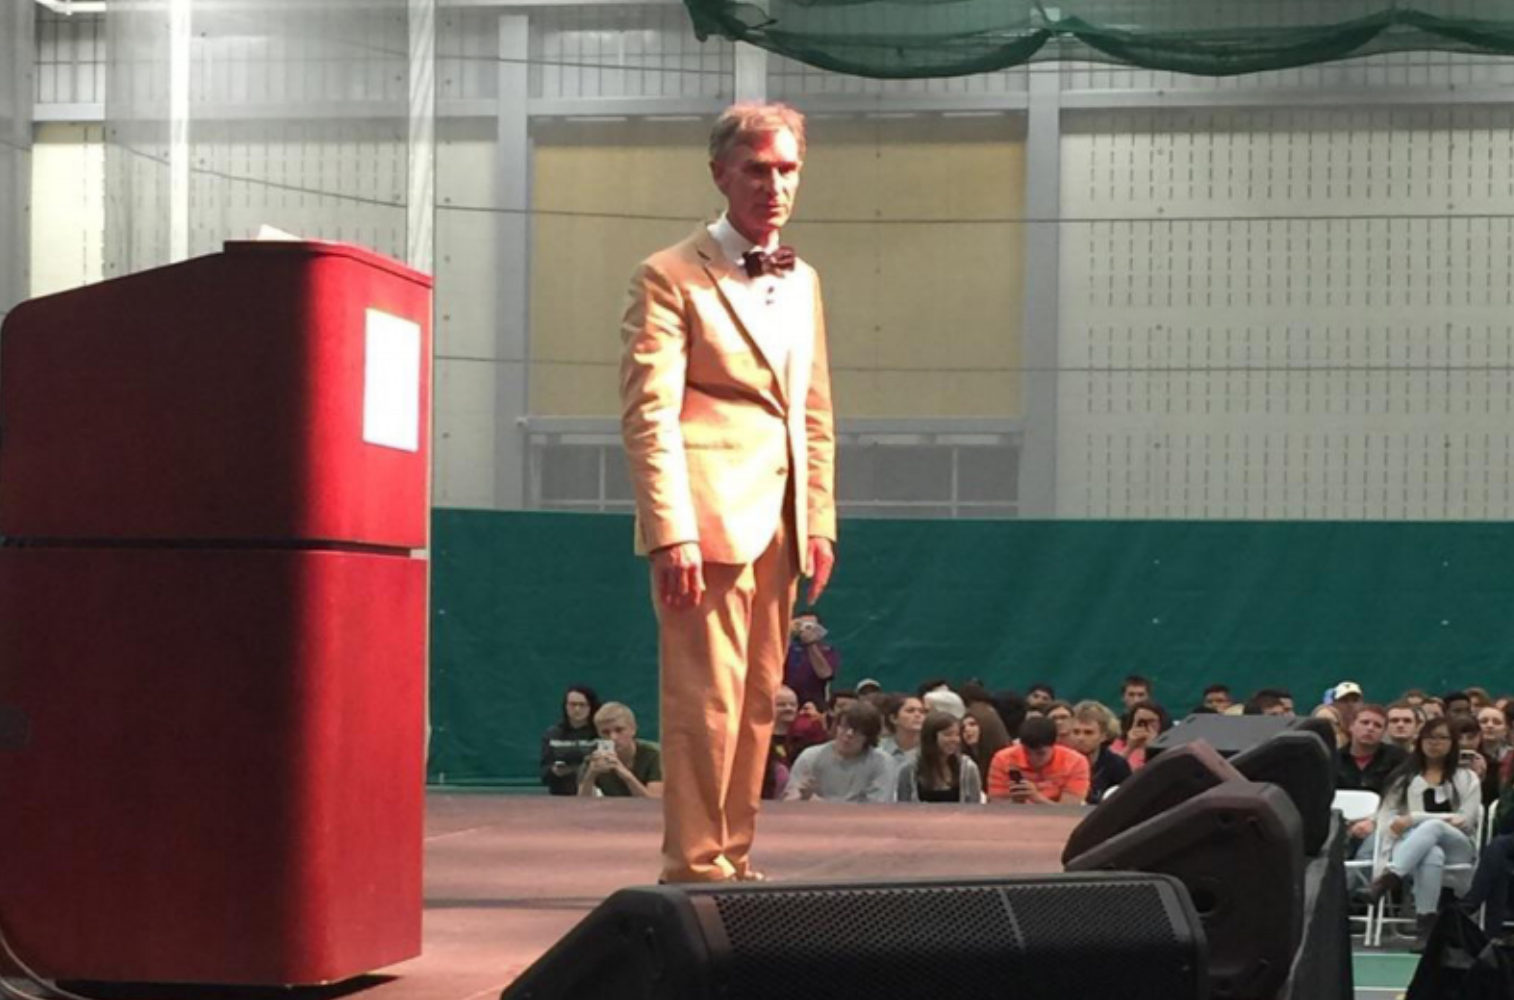 Bill Nye presenting at Mohawk Valley Community College. Photo by Rebecca Souza